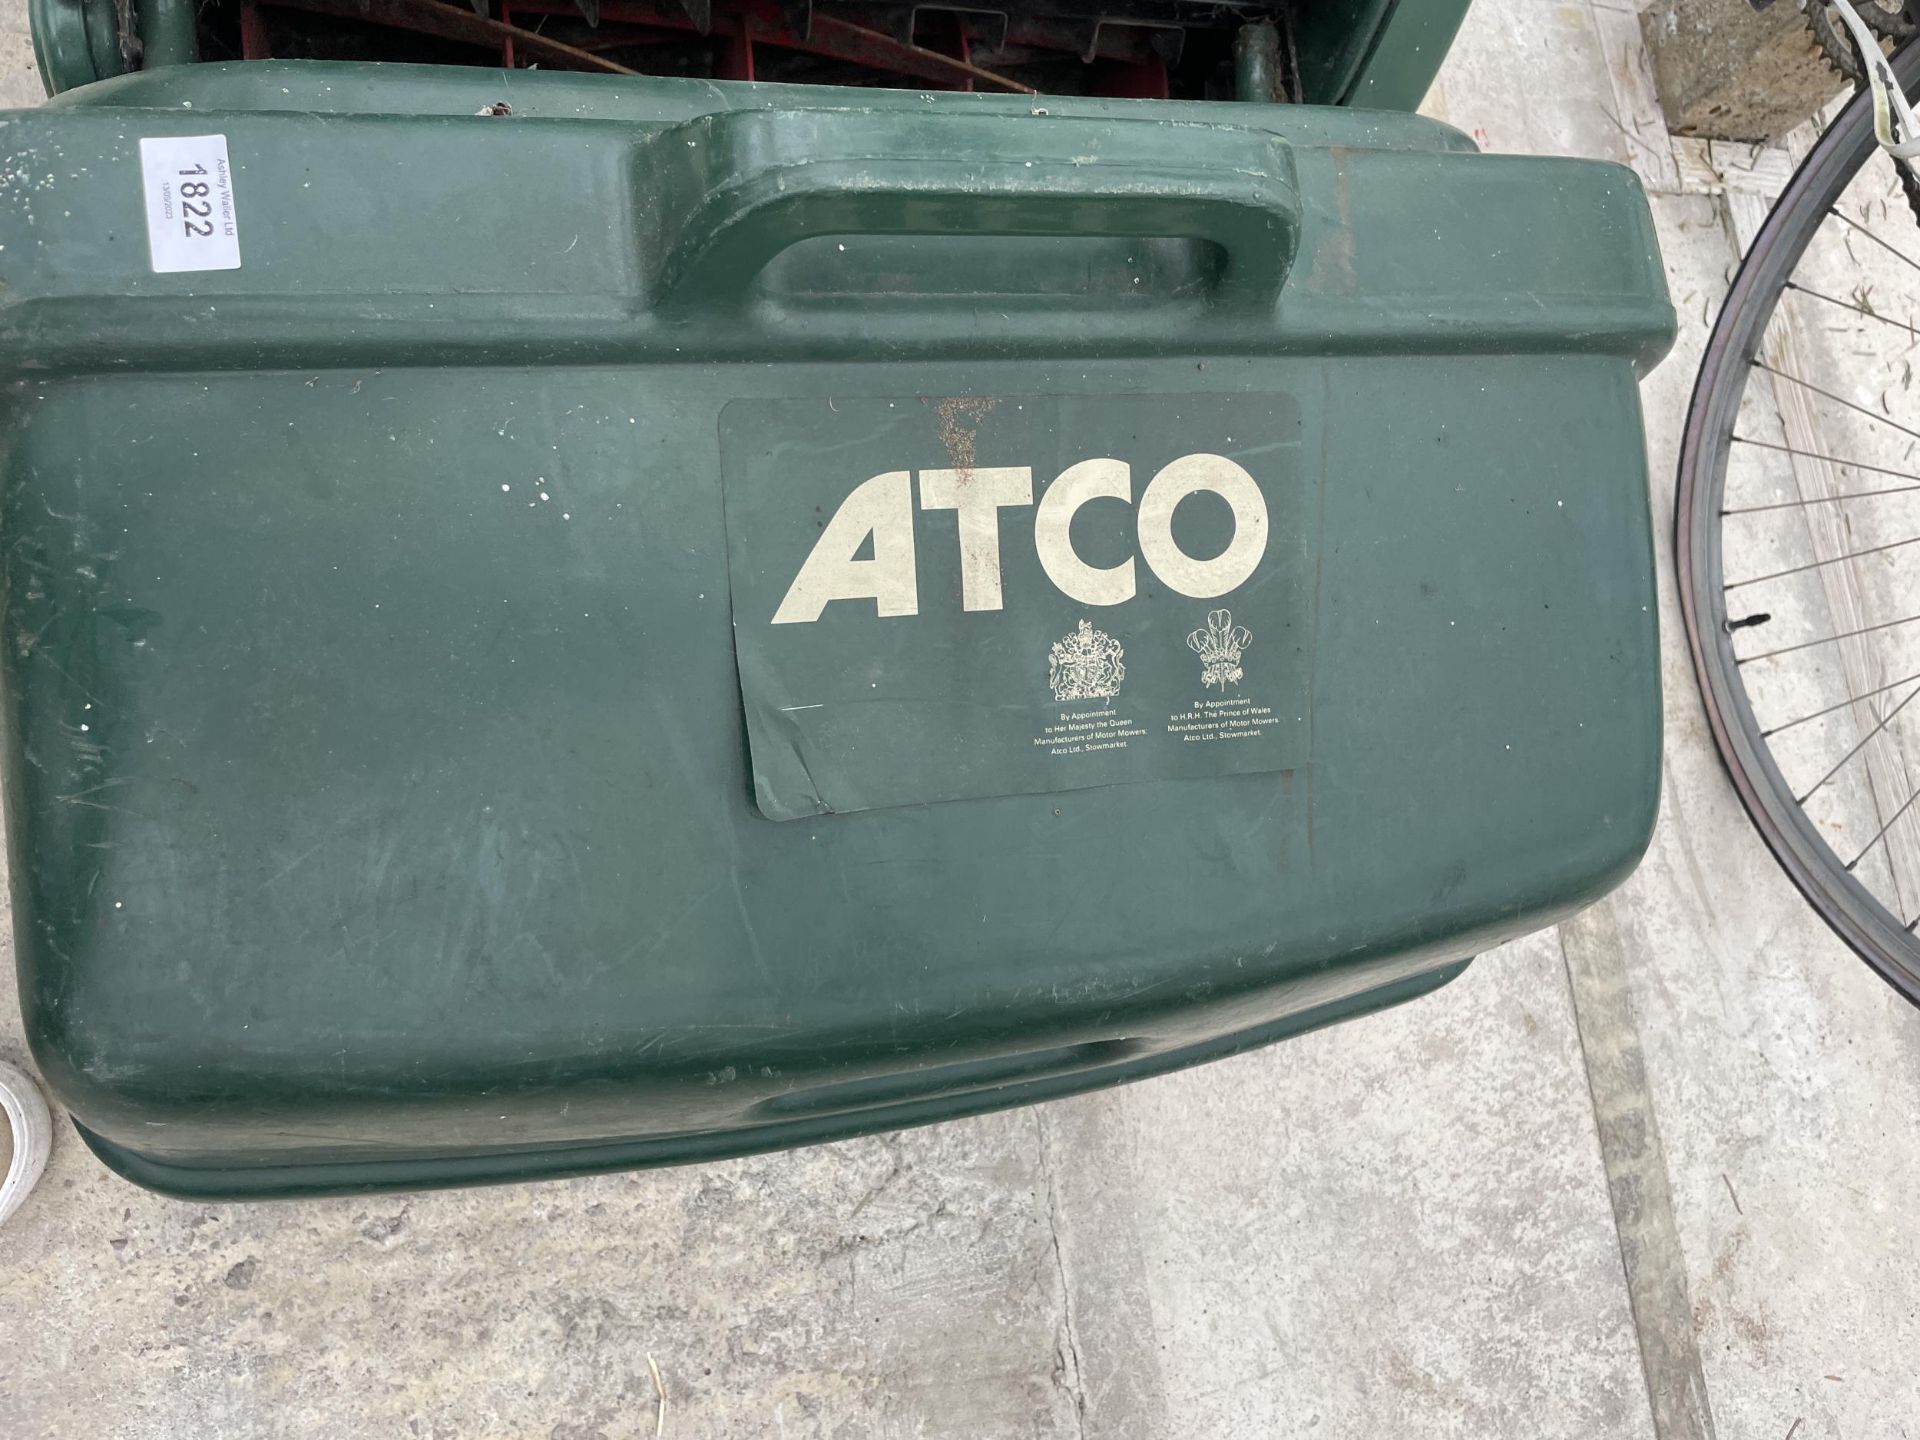 AN ATCO CYLINDER MOWER WITH GRASS BOX BELIEVED IN WORKING ORDER BUT NO WARRANTY - Image 2 of 4